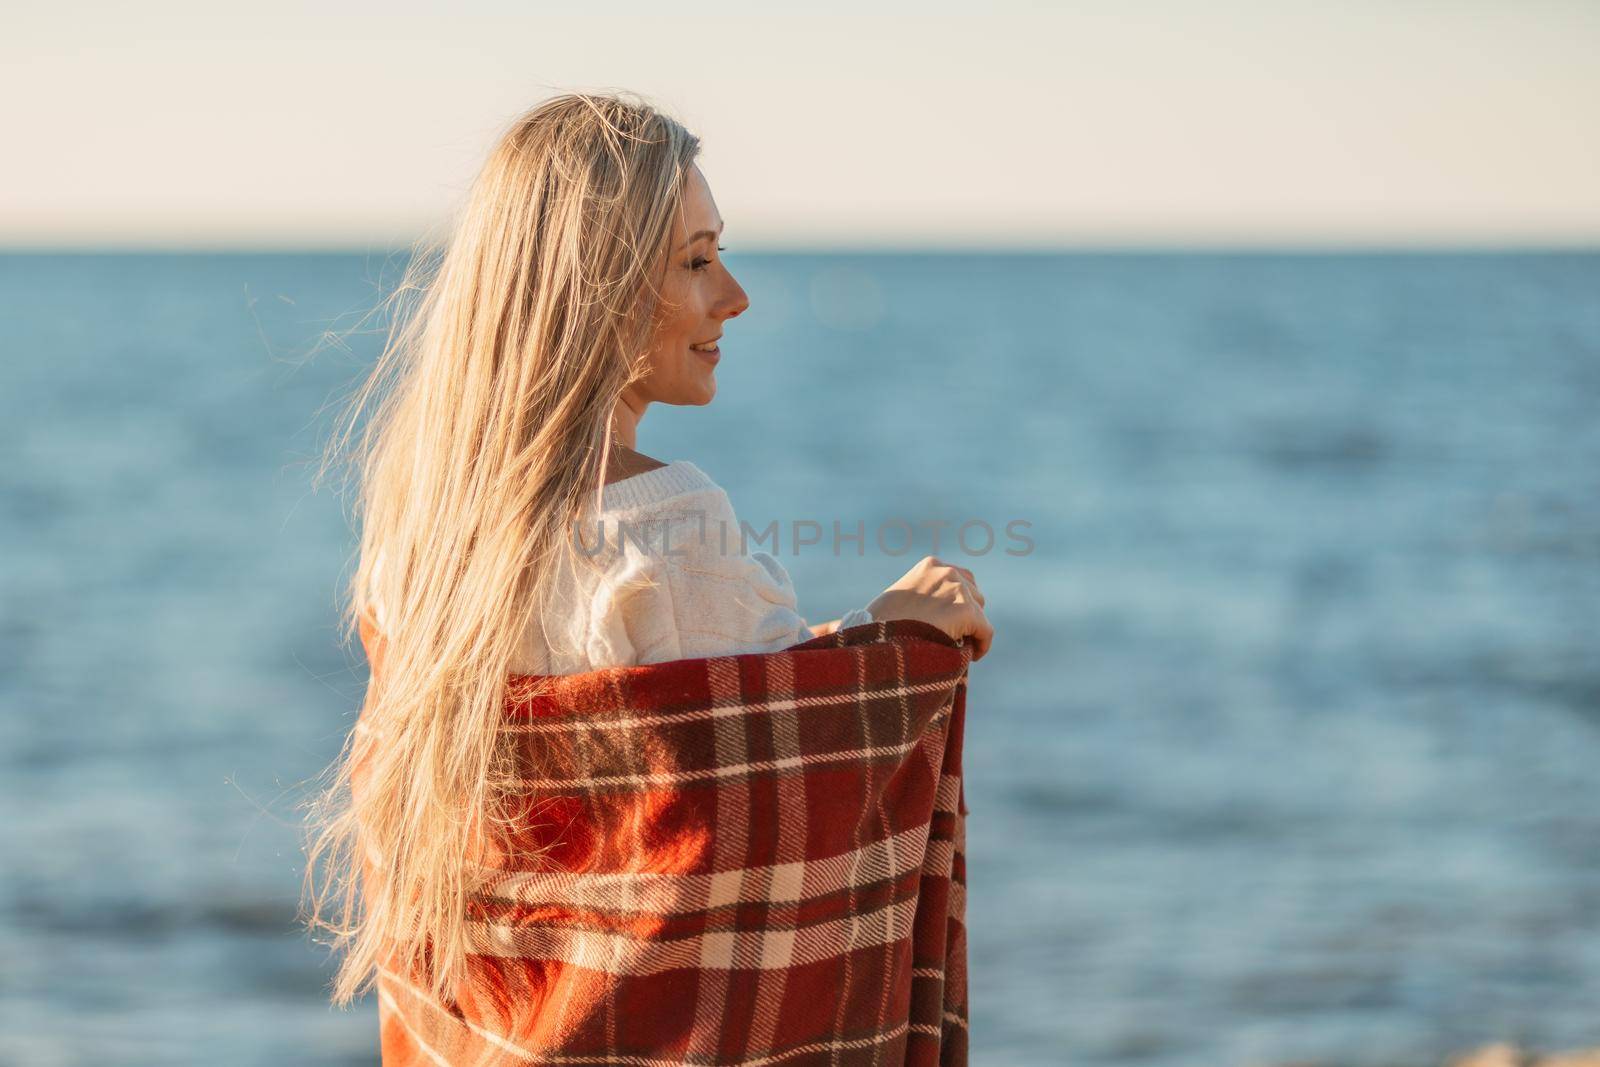 Attractive blonde Caucasian woman enjoying time on the beach at sunset, walking in a blanket and looking to the side, with the sunset sky and sea in the background. Beach vacation.